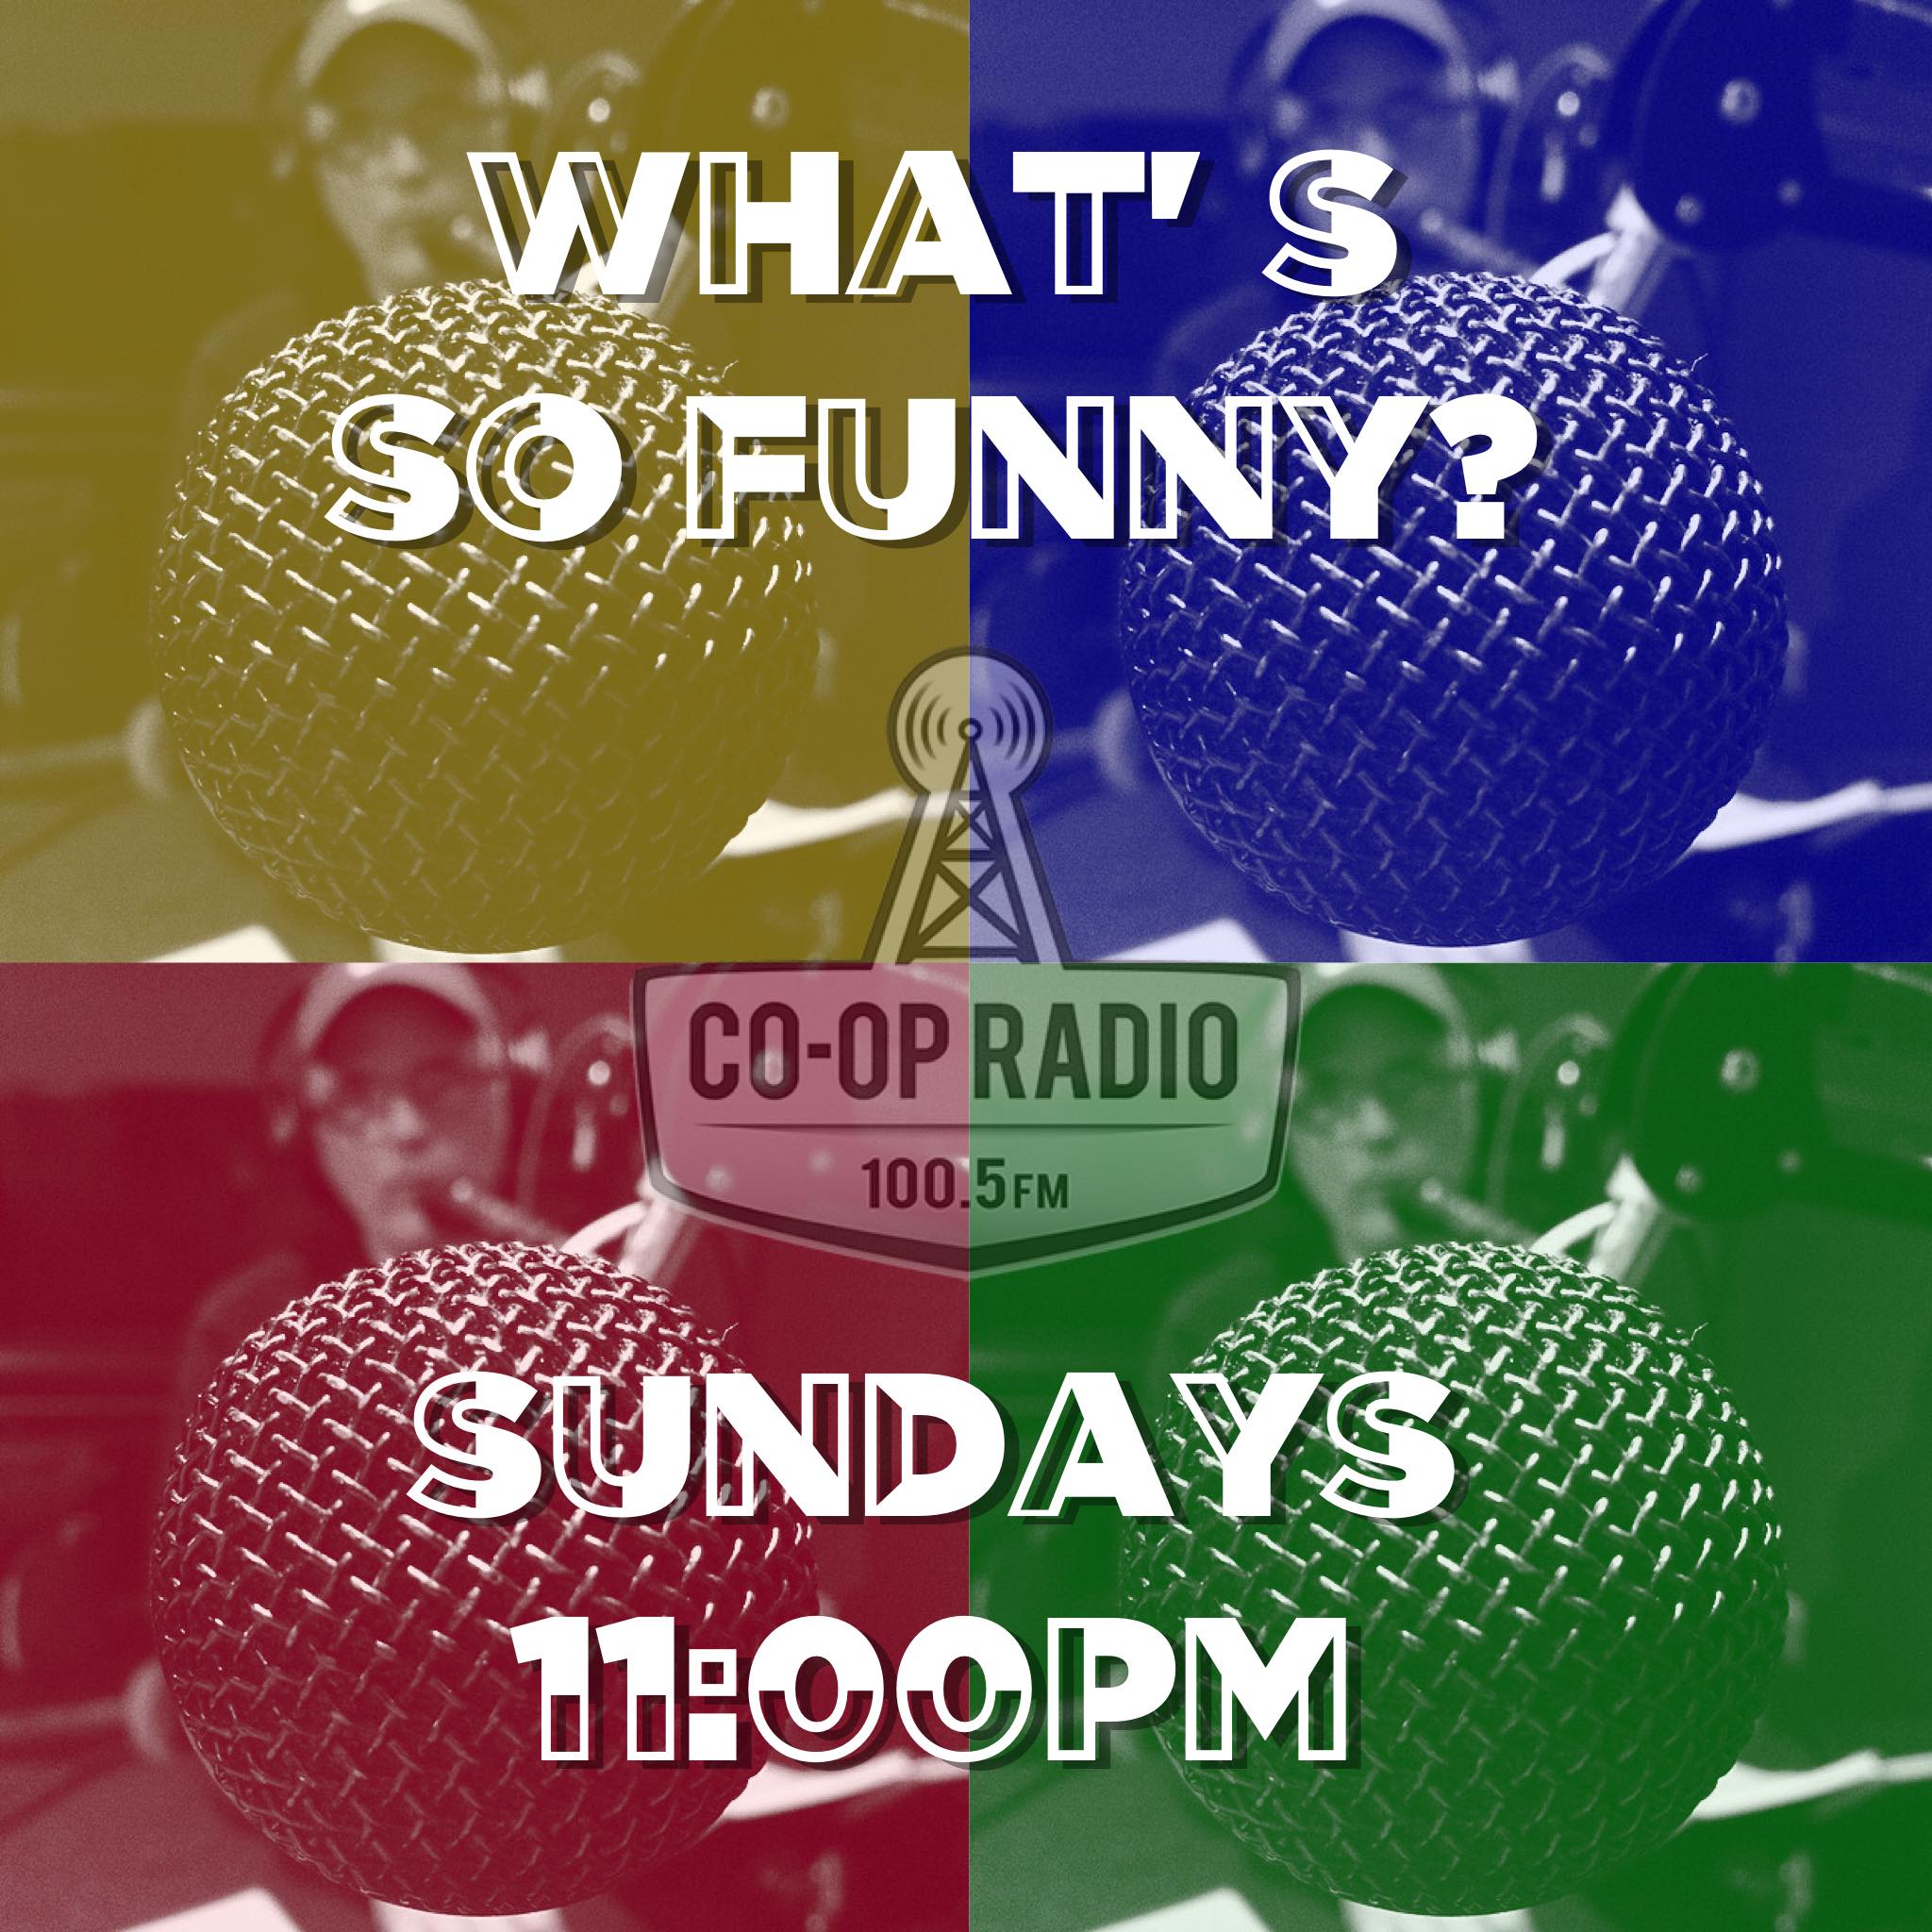 What's so funnny microphone logo